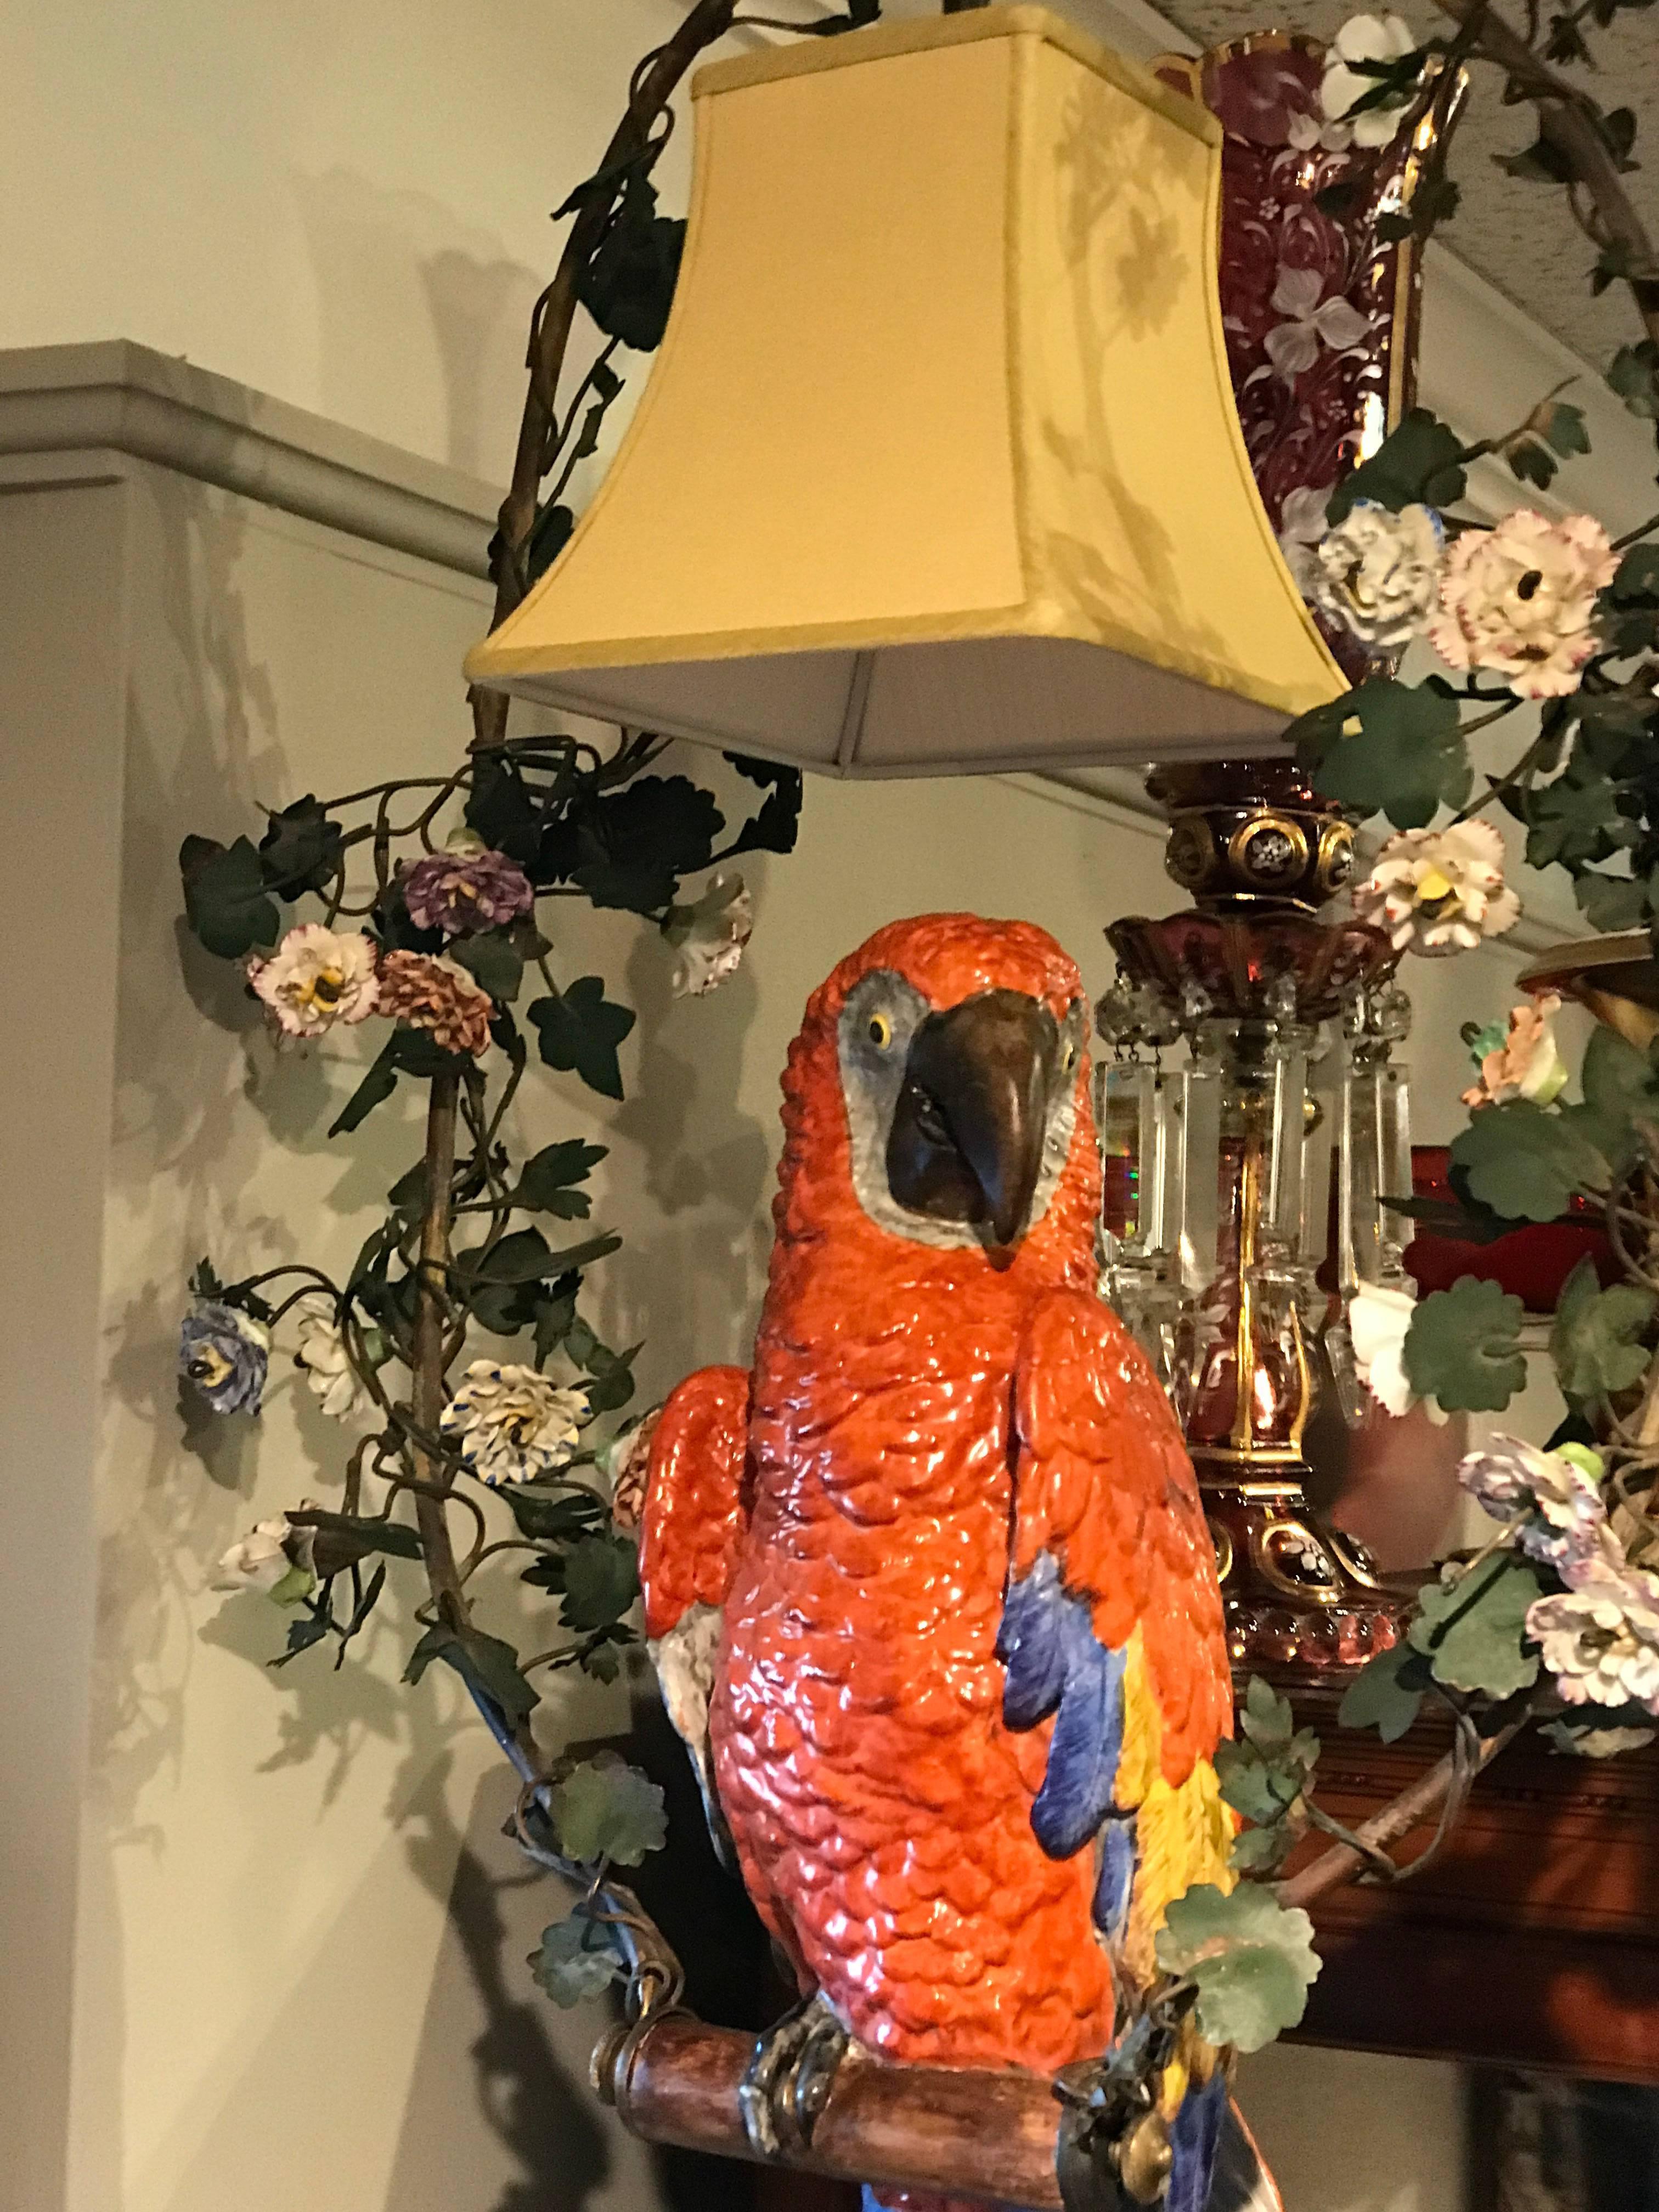 Meissen style parrot chandelier, large beautifully painted and modeled figure of a perched parrot. Sitting in a gilt bronze trellis with porcelain flowers
The parrot alone is 24 inches high.